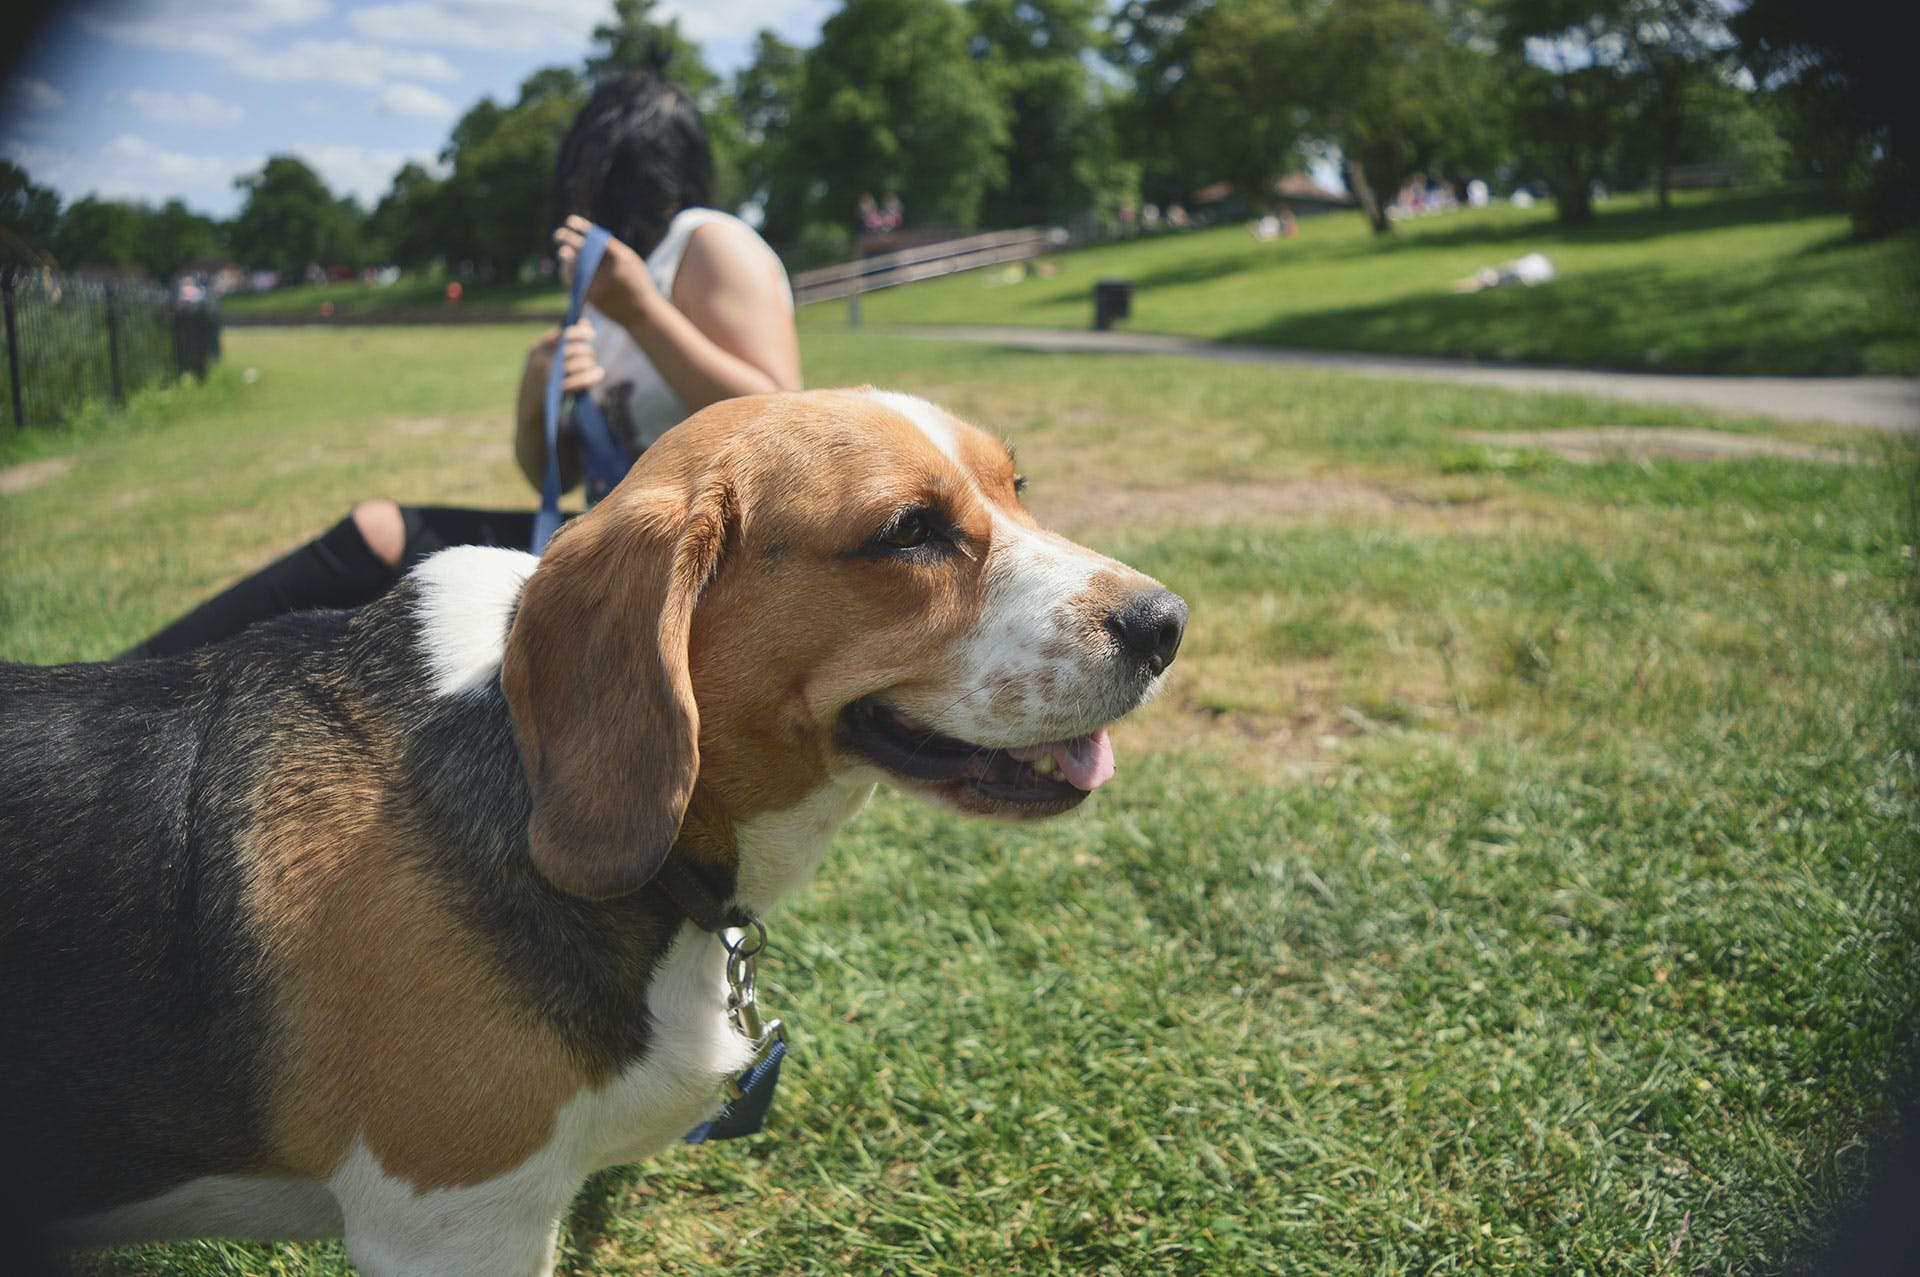 A Beagle on a leash standing in a sunny field outdoors